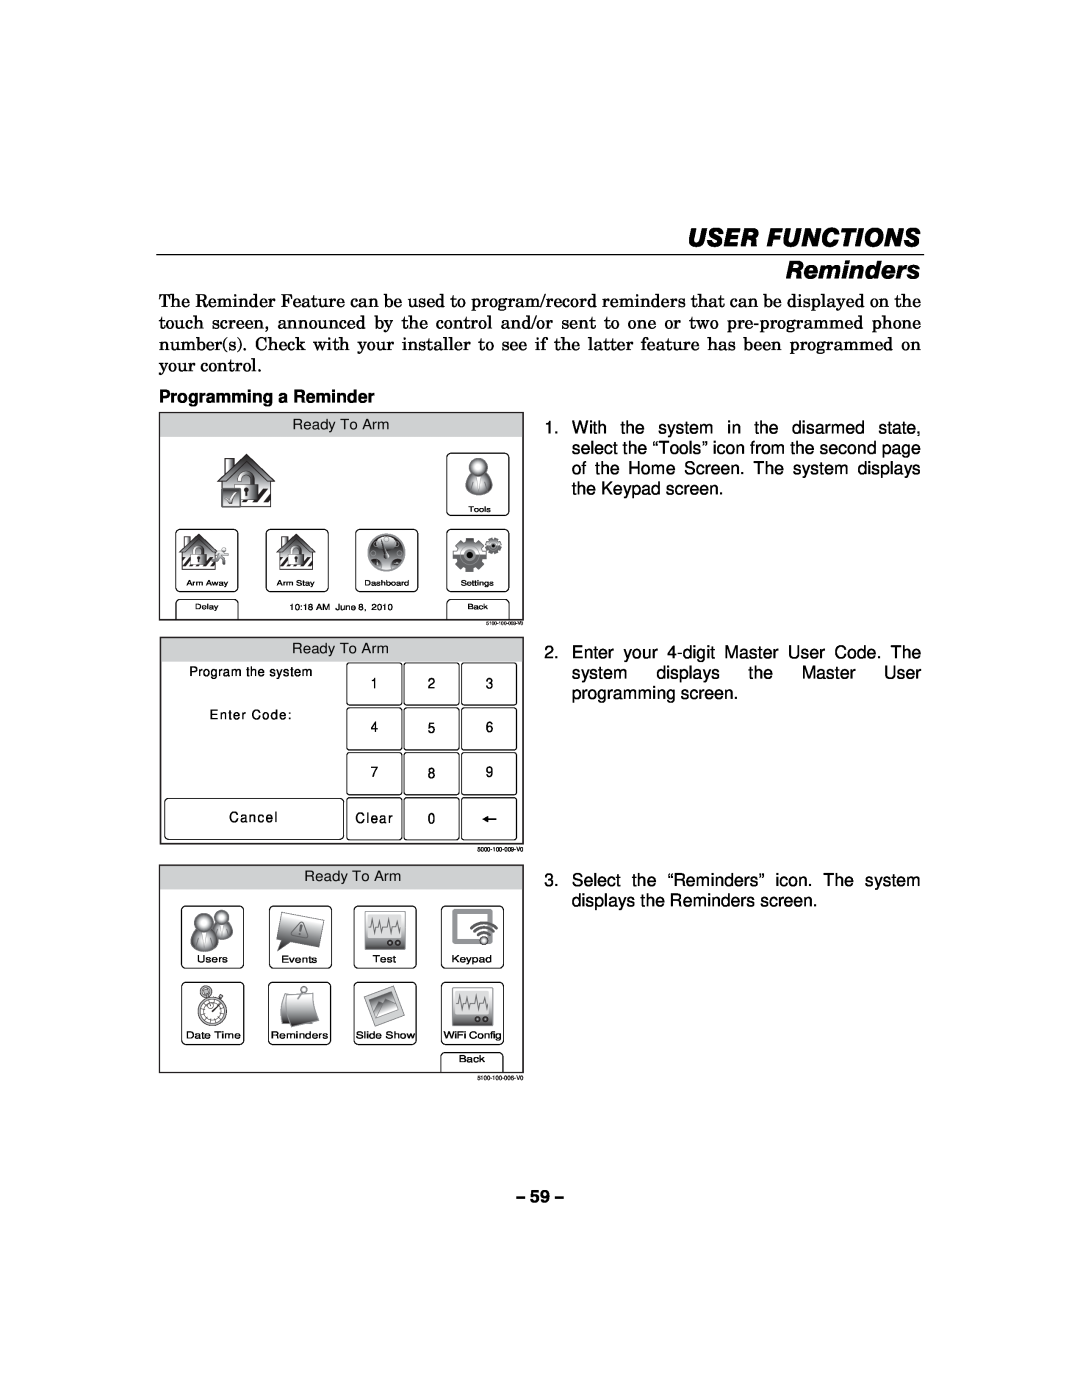 Honeywell L5100 manual USER FUNCTIONS Reminders, Programming a Reminder 